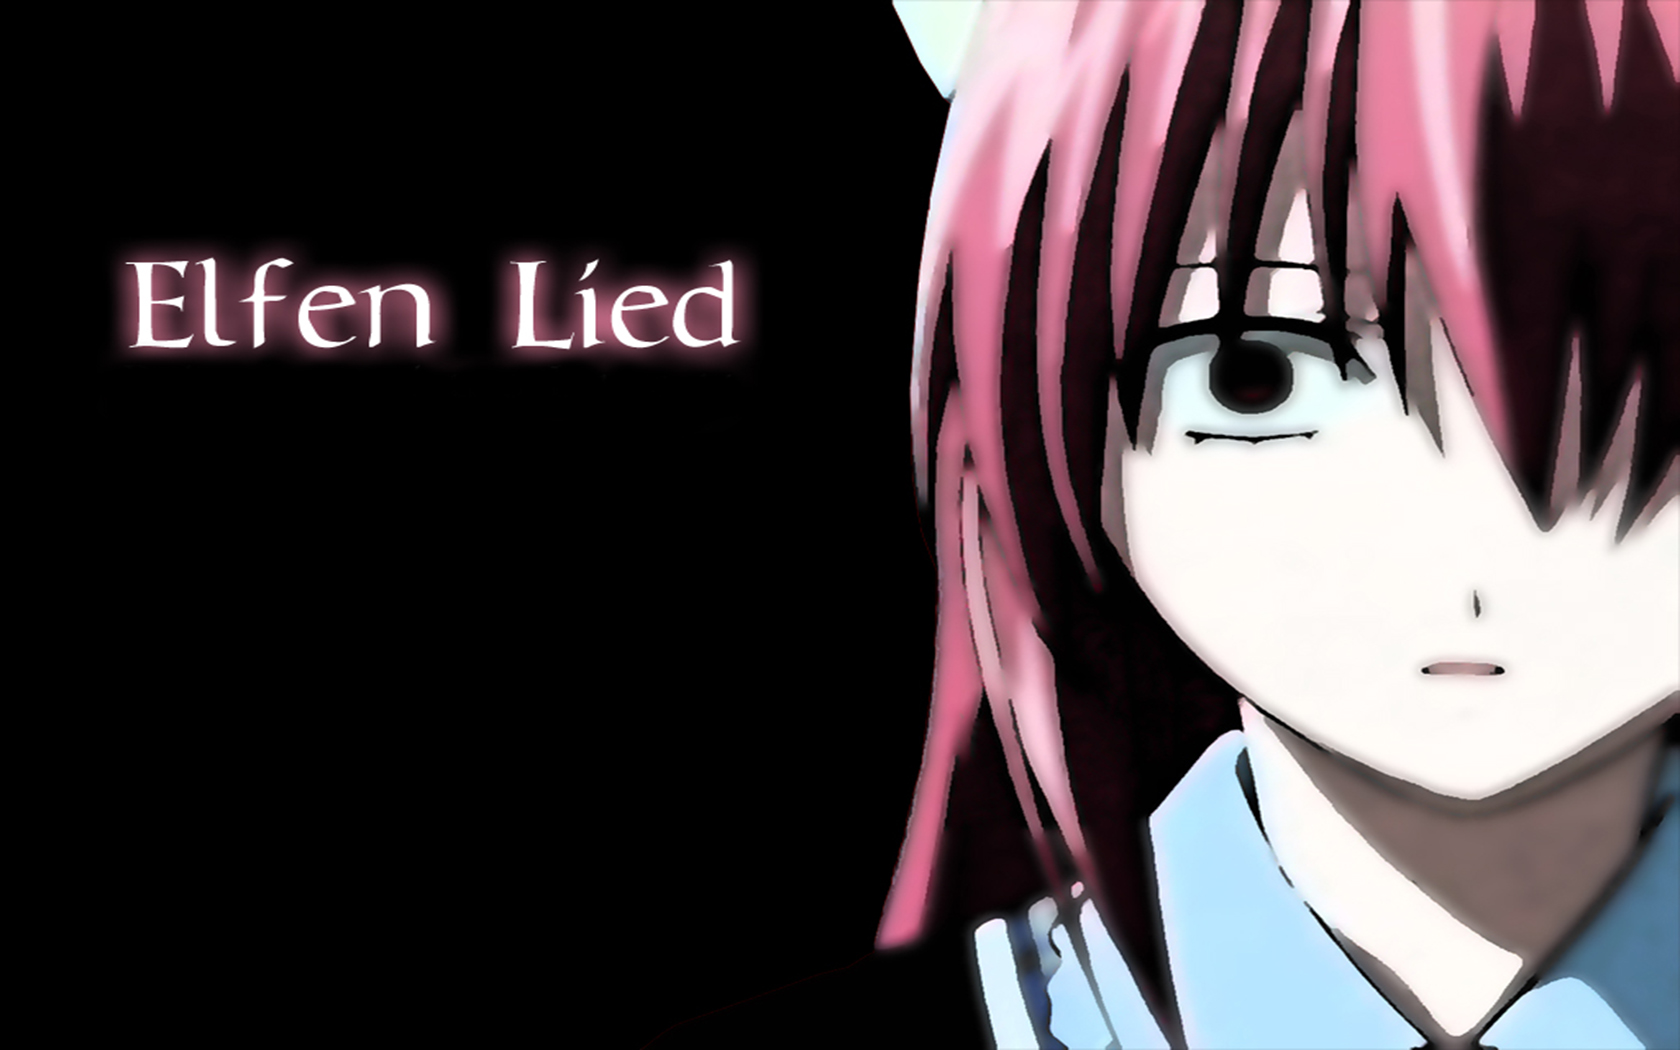 99 Elfen Lied HD Wallpapers Backgrounds - Wallpaper Abyss -